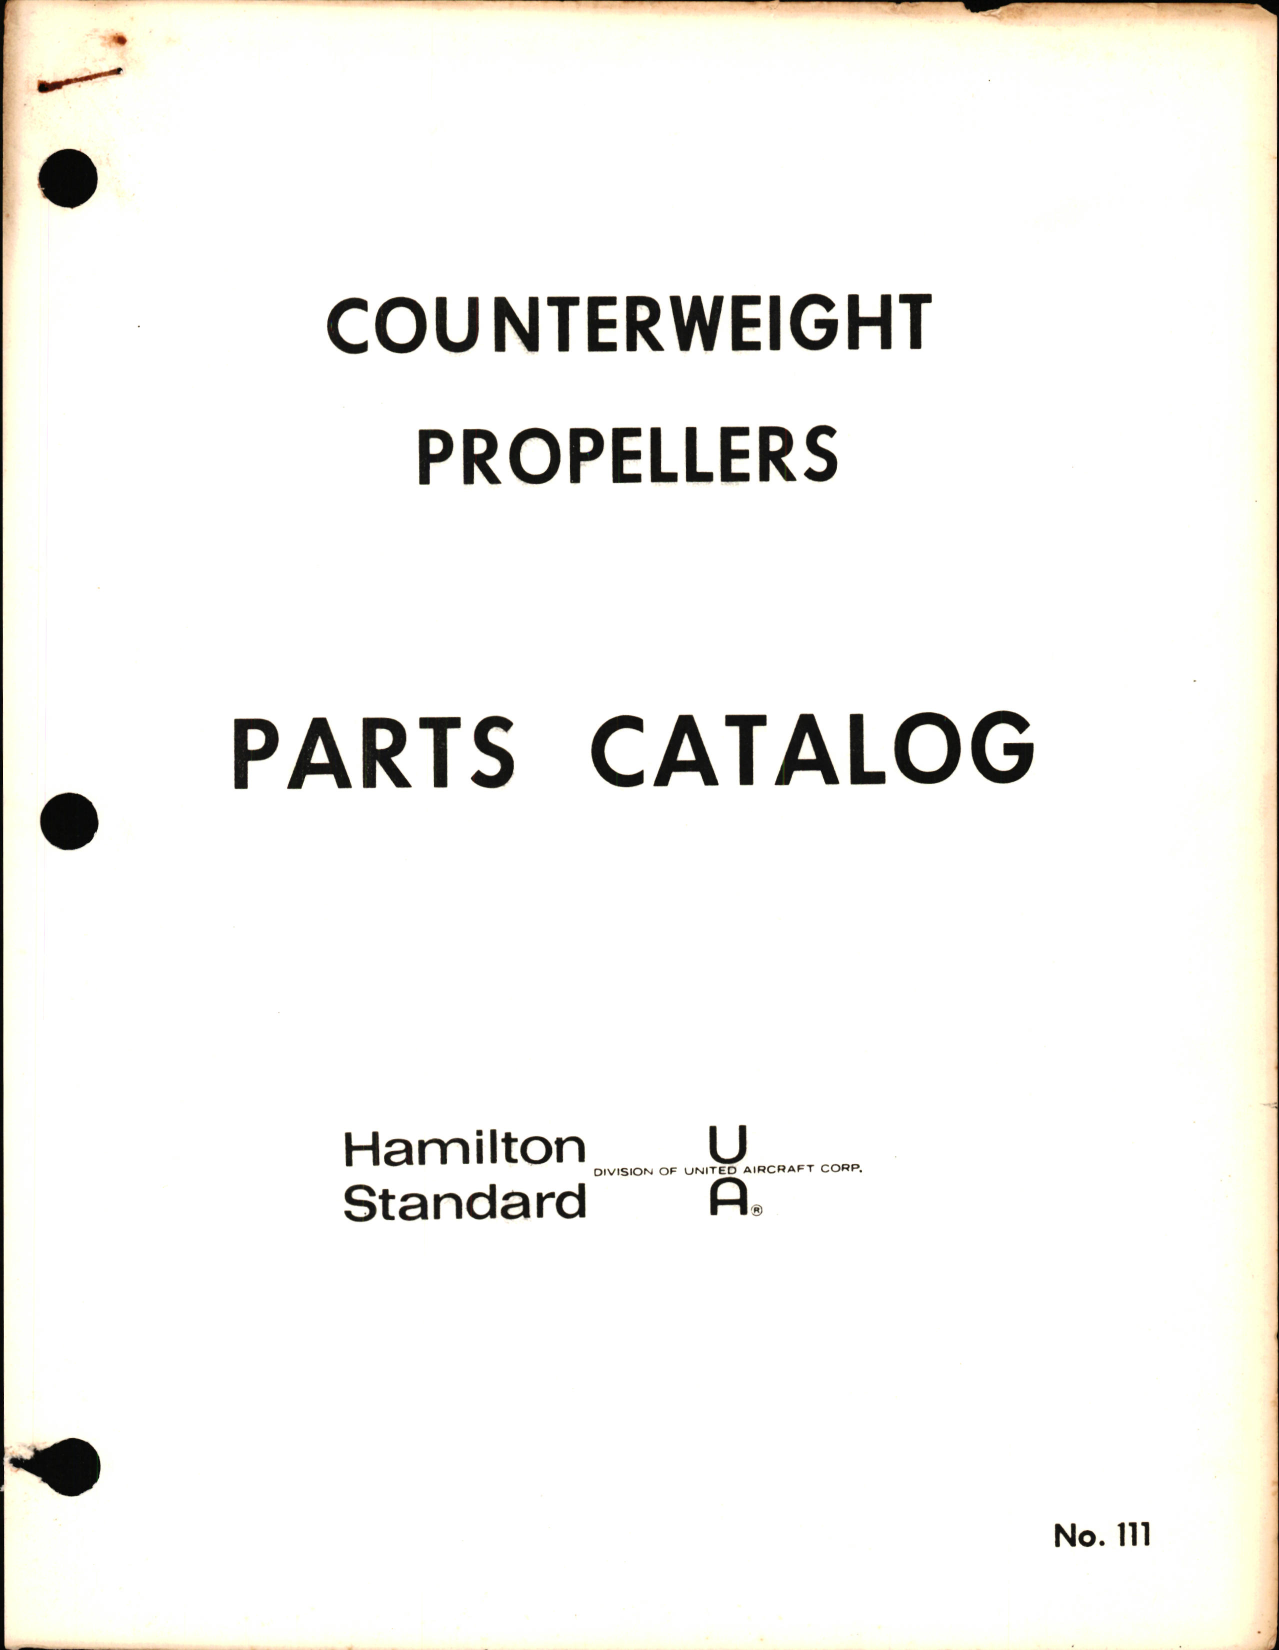 Sample page 1 from AirCorps Library document: Parts Catalog for Counterweight Propellers